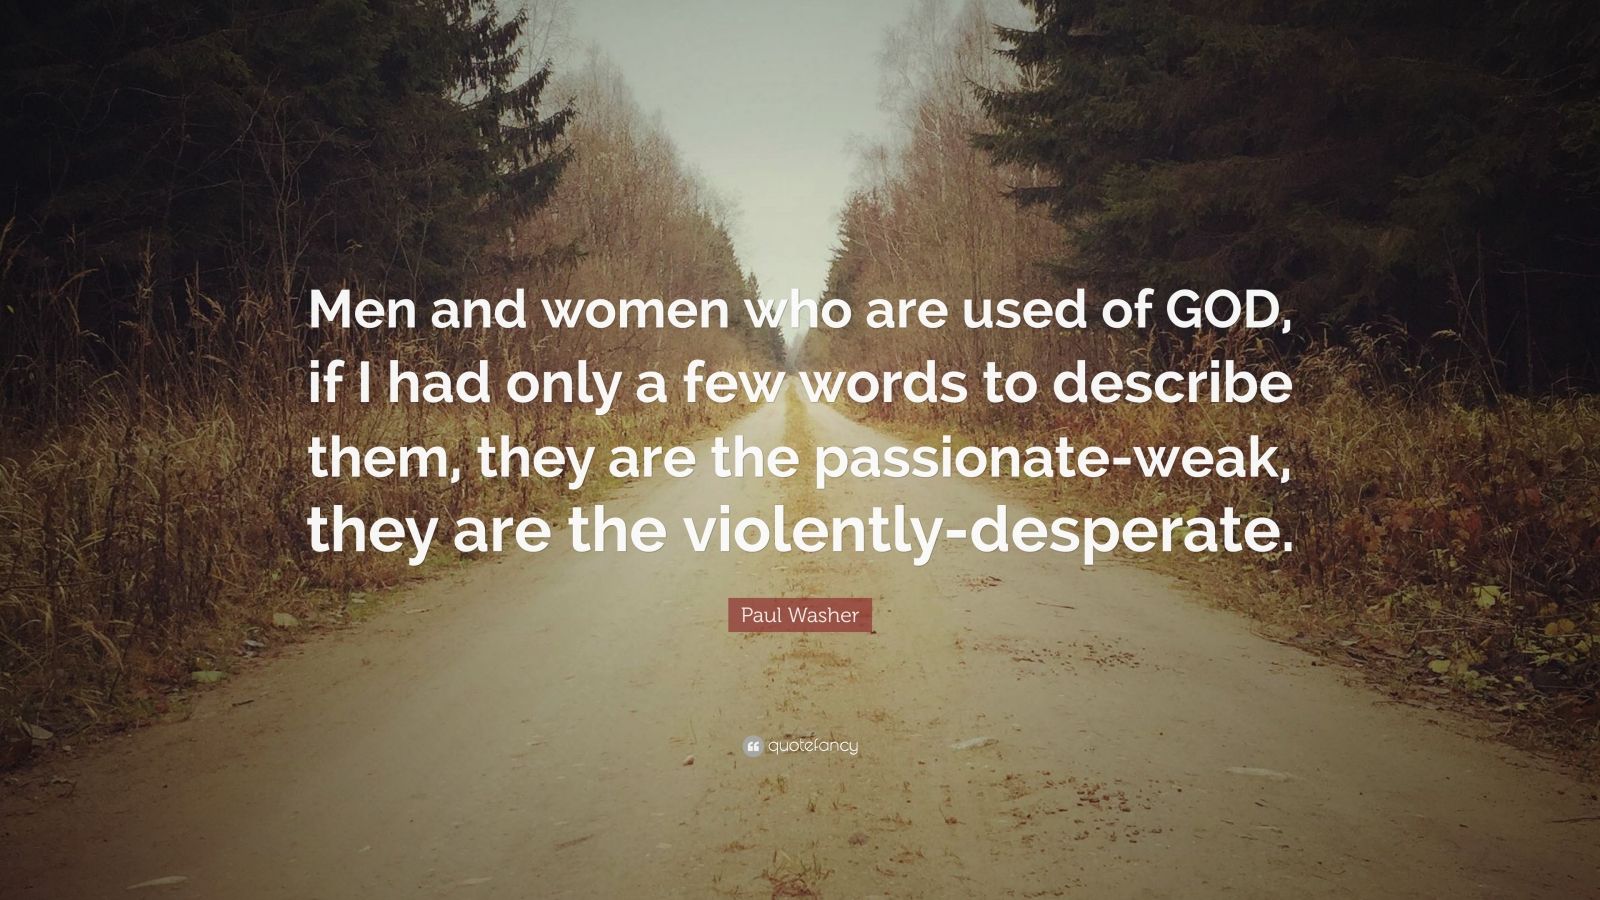 Paul Washer Quote: "Men and women who are used of GOD, if I had only a few words to describe ...